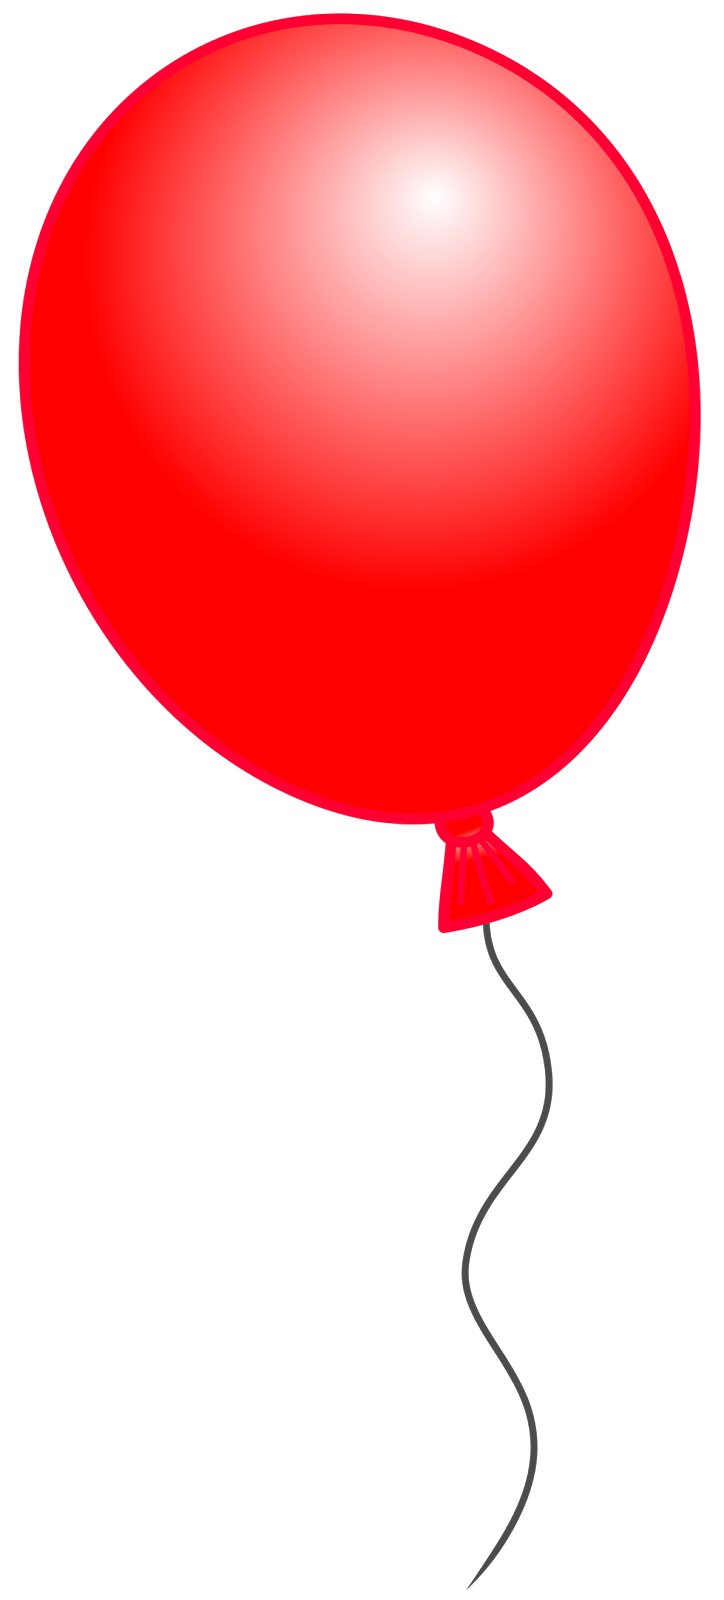 Free Balloon Template Cliparts, Download Free Balloon Template Cliparts ...